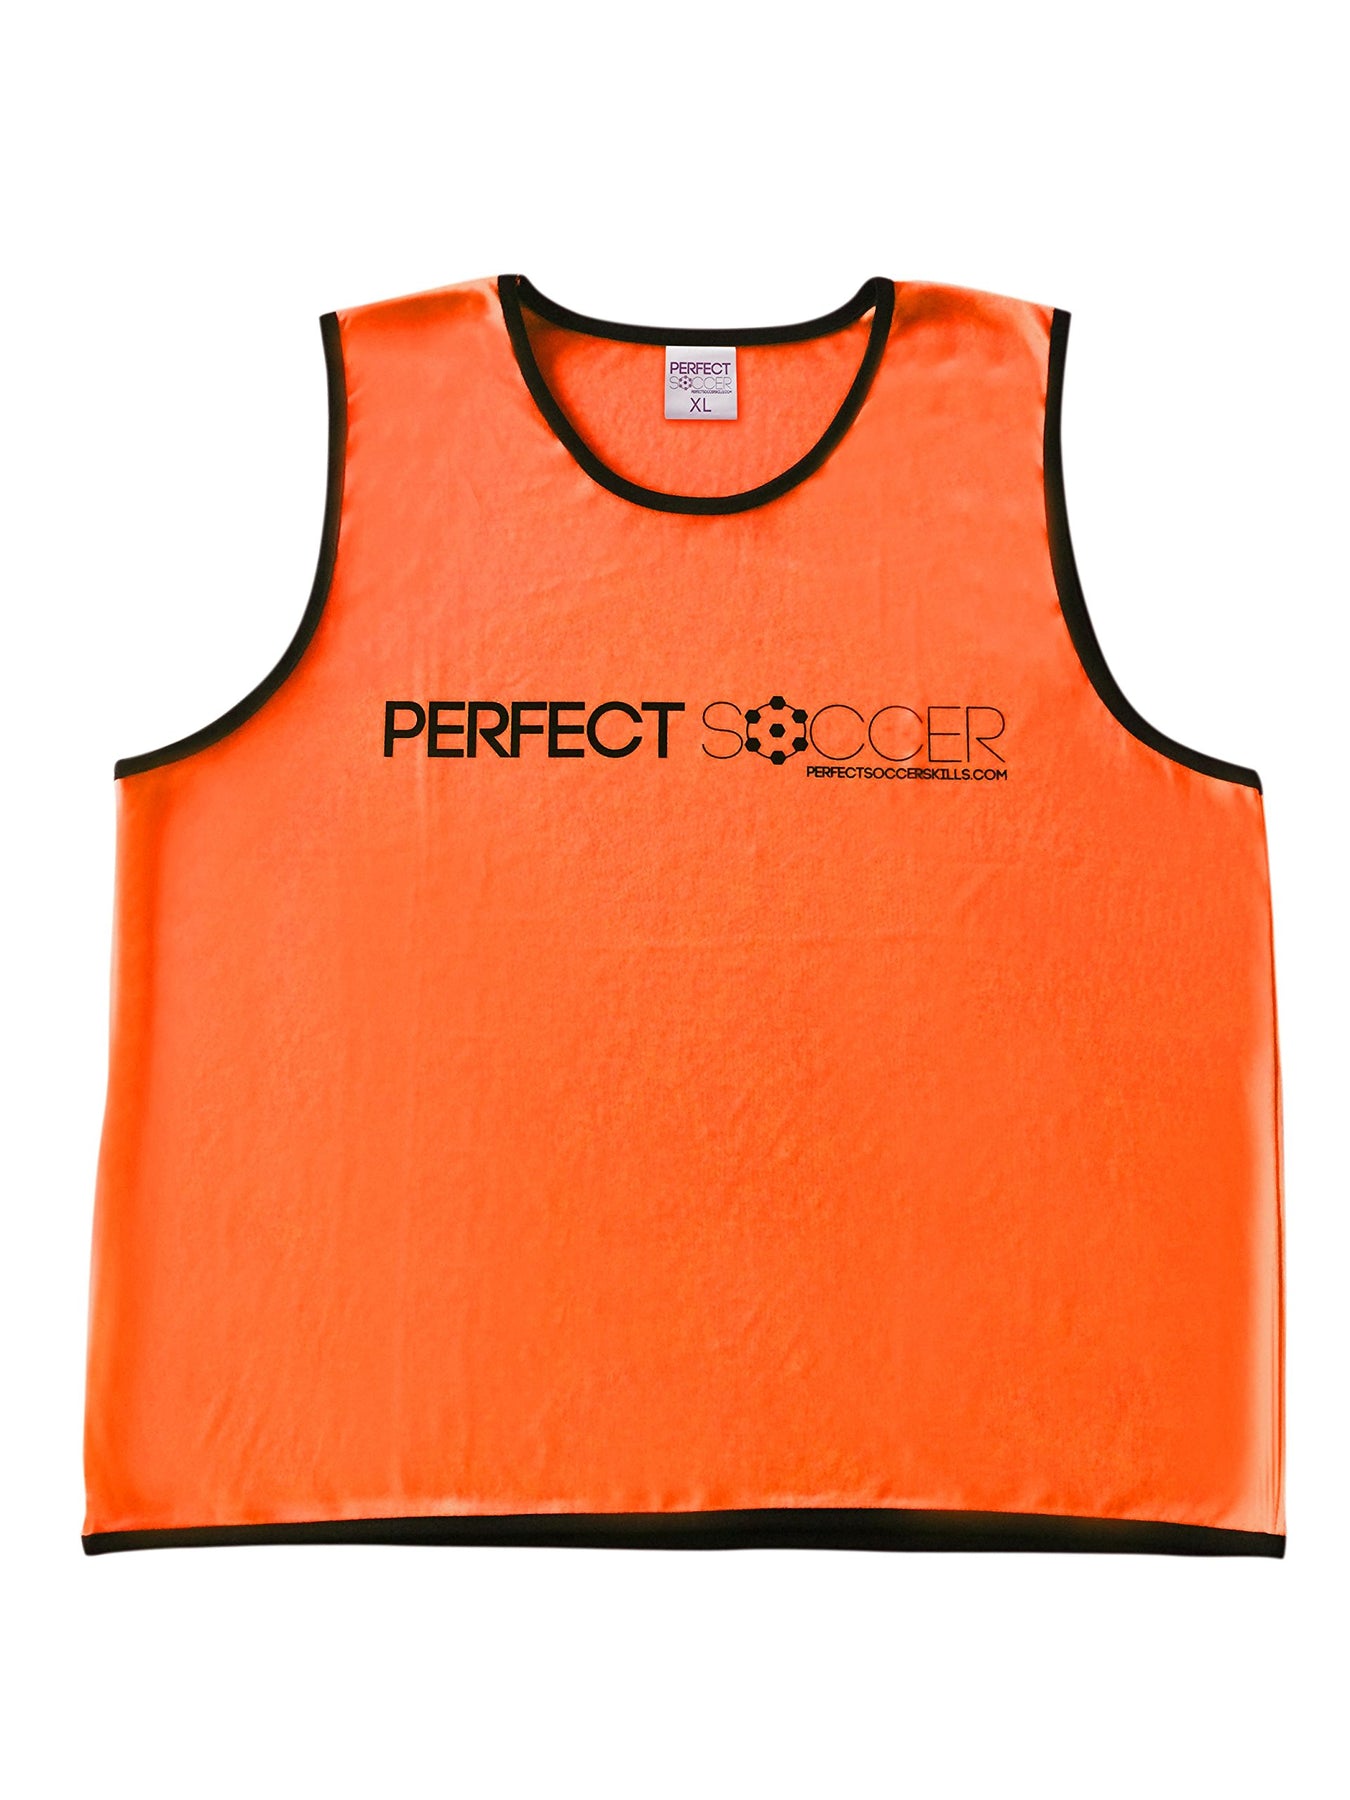 Scrimmage Training Vest - Soccer, Basketball, Football Bibs/Pinnies -  Practice Jersey Pennies for Kids, Youth and Adults